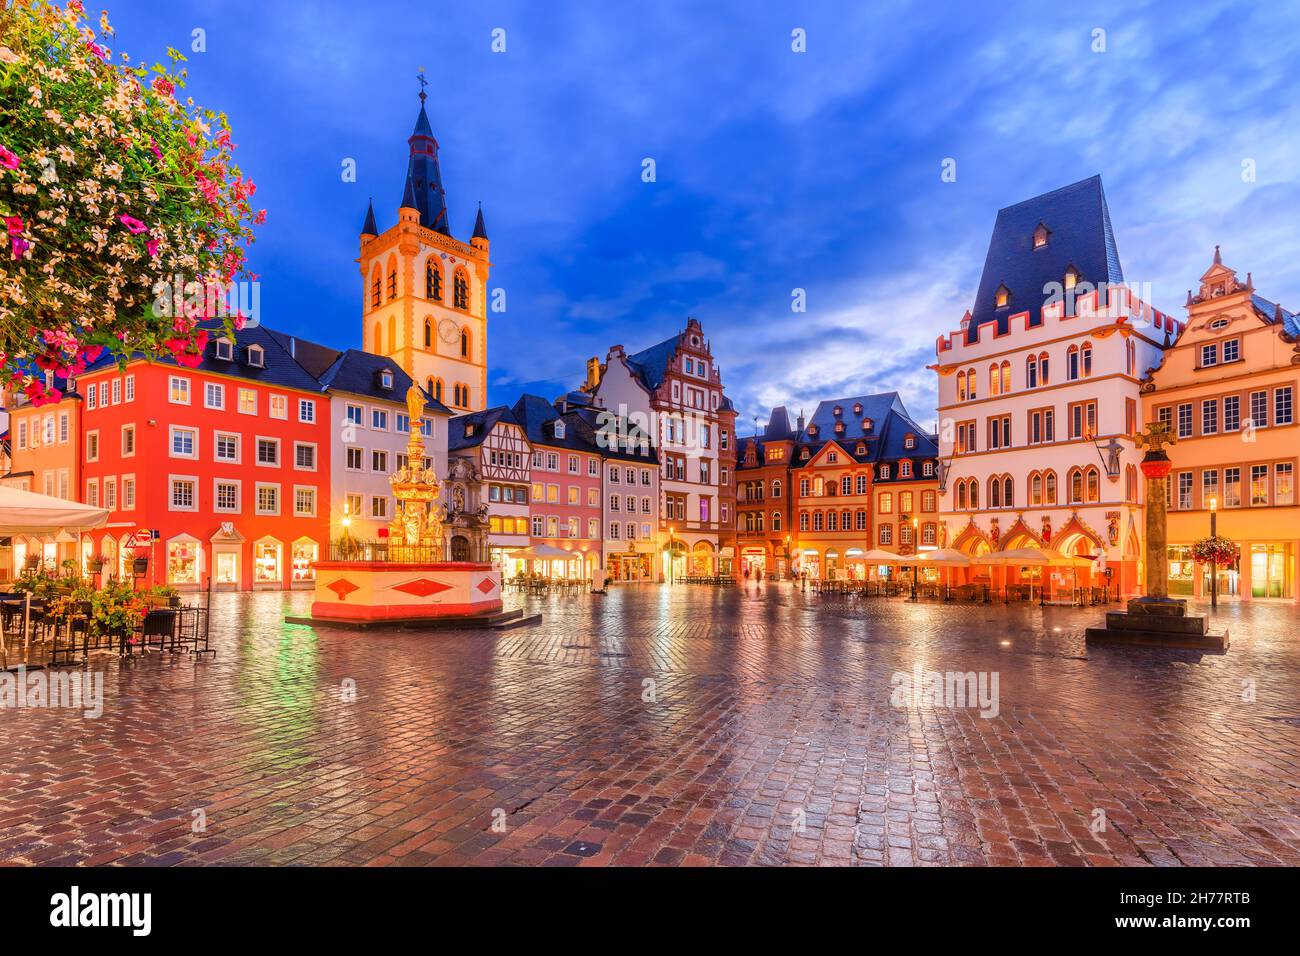 Trier, Germany. Hauptmarkt market square and St. Gangolf church. Stock Photo